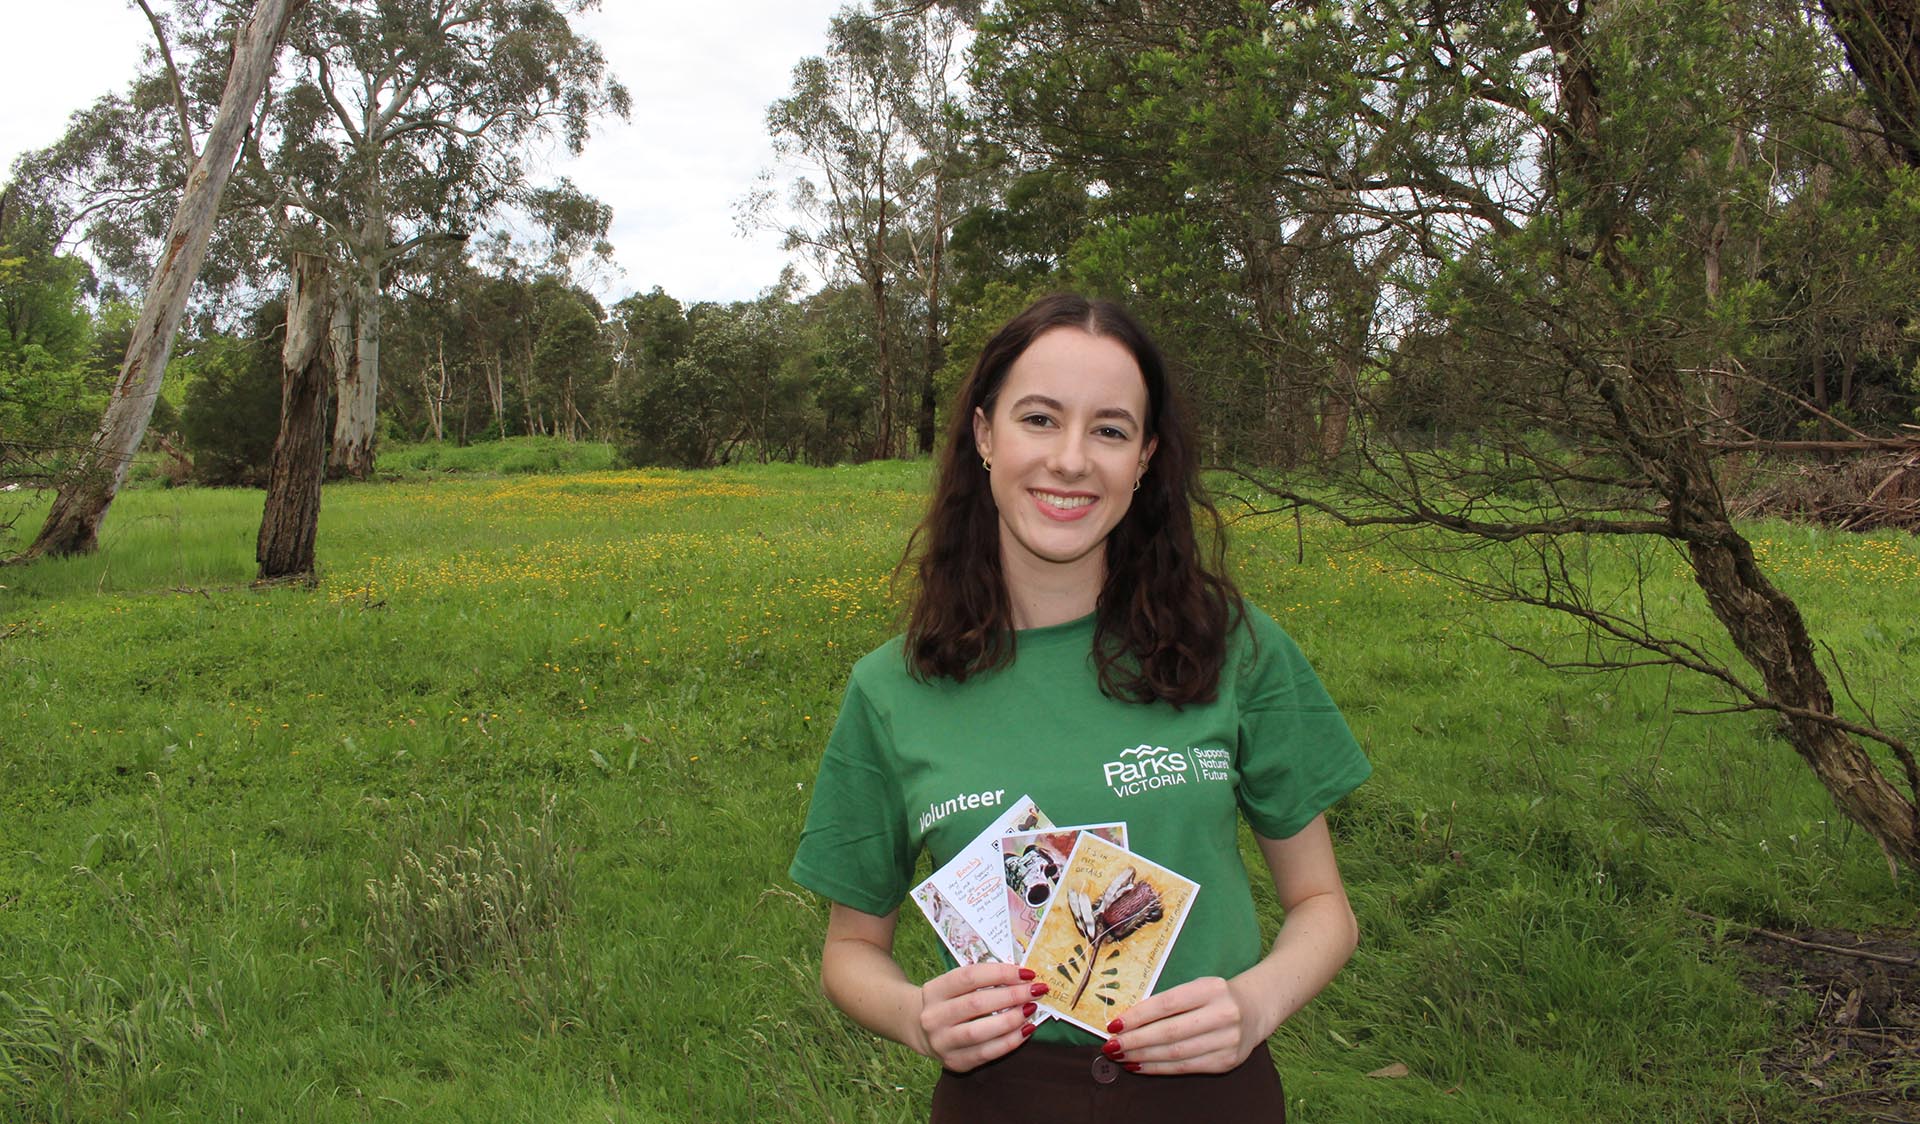 A girl wearing a Parks Victoria volunteer t-shirt, smiling and holding up a set of illustrated cards with grass and trees in the background.